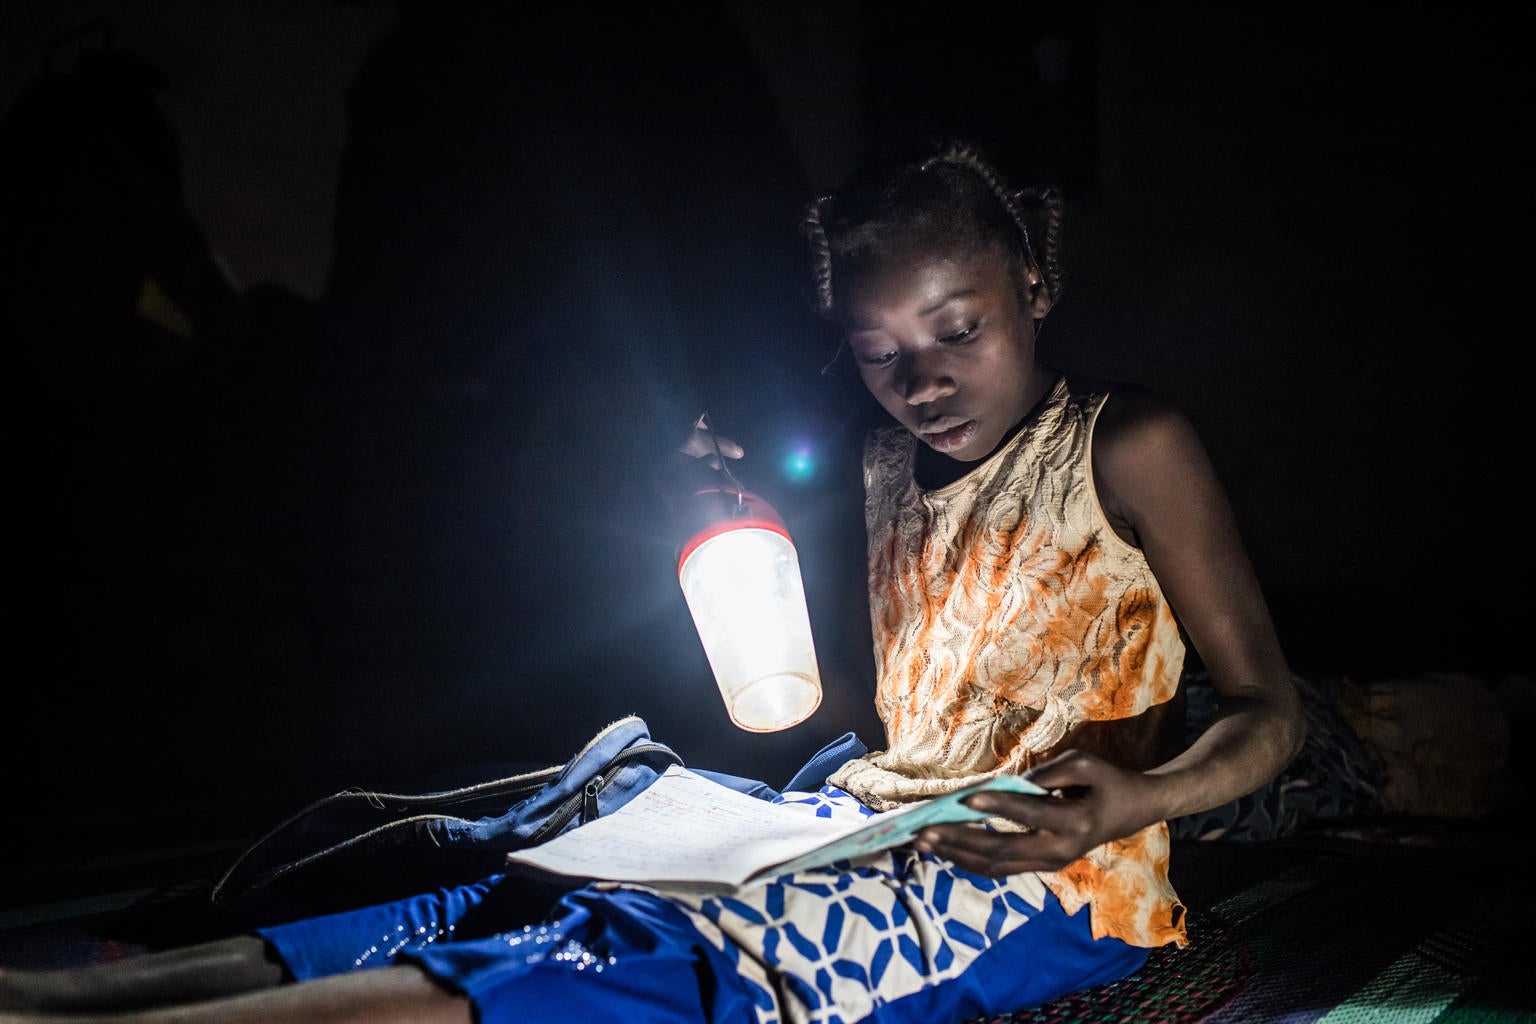 Nabyla, 13, studies at night with a handheld light in her family’s temporary home in Kaya